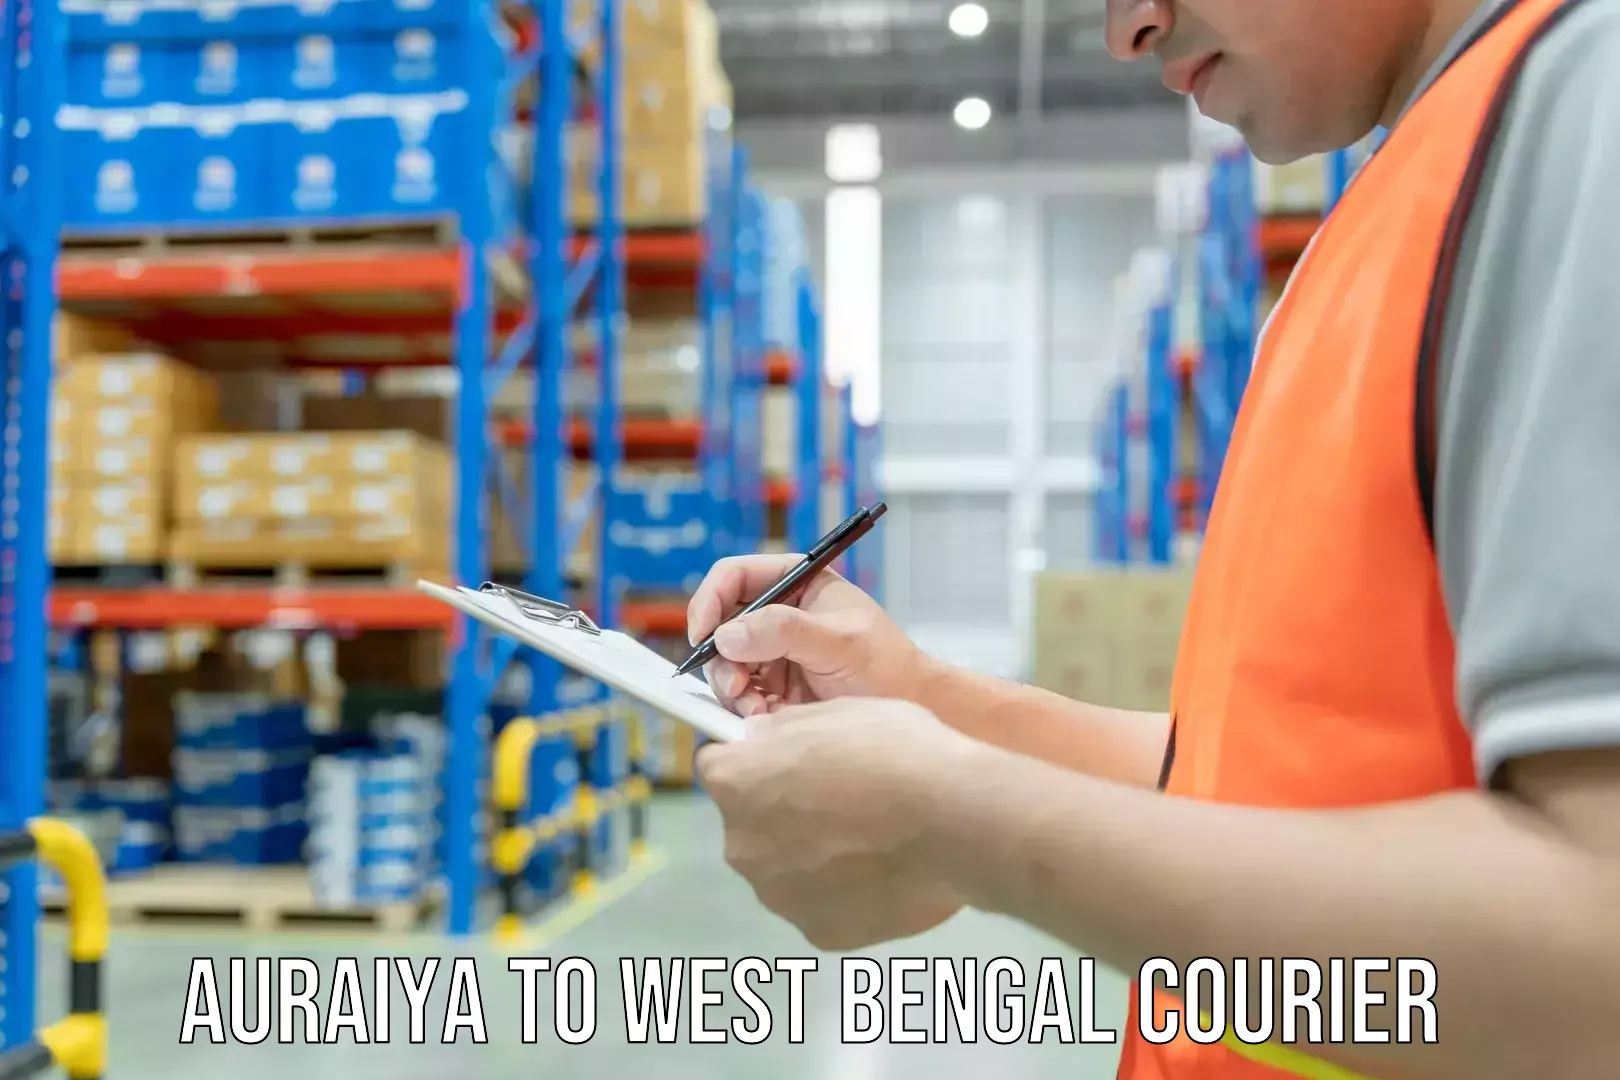 Courier service innovation Auraiya to West Bengal